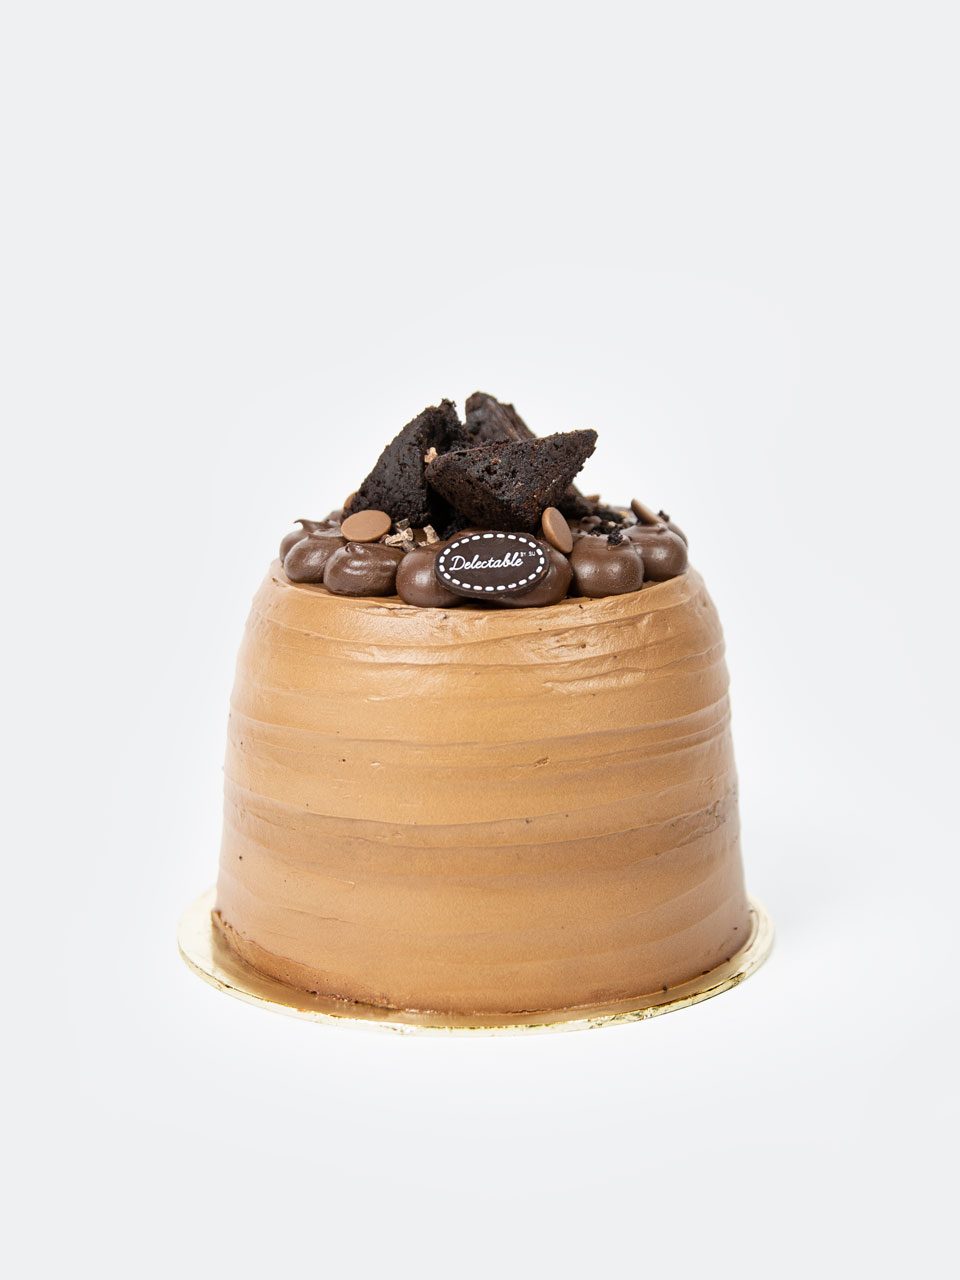 Delectable Chocolate Cake - Online cake delivery Malaysia